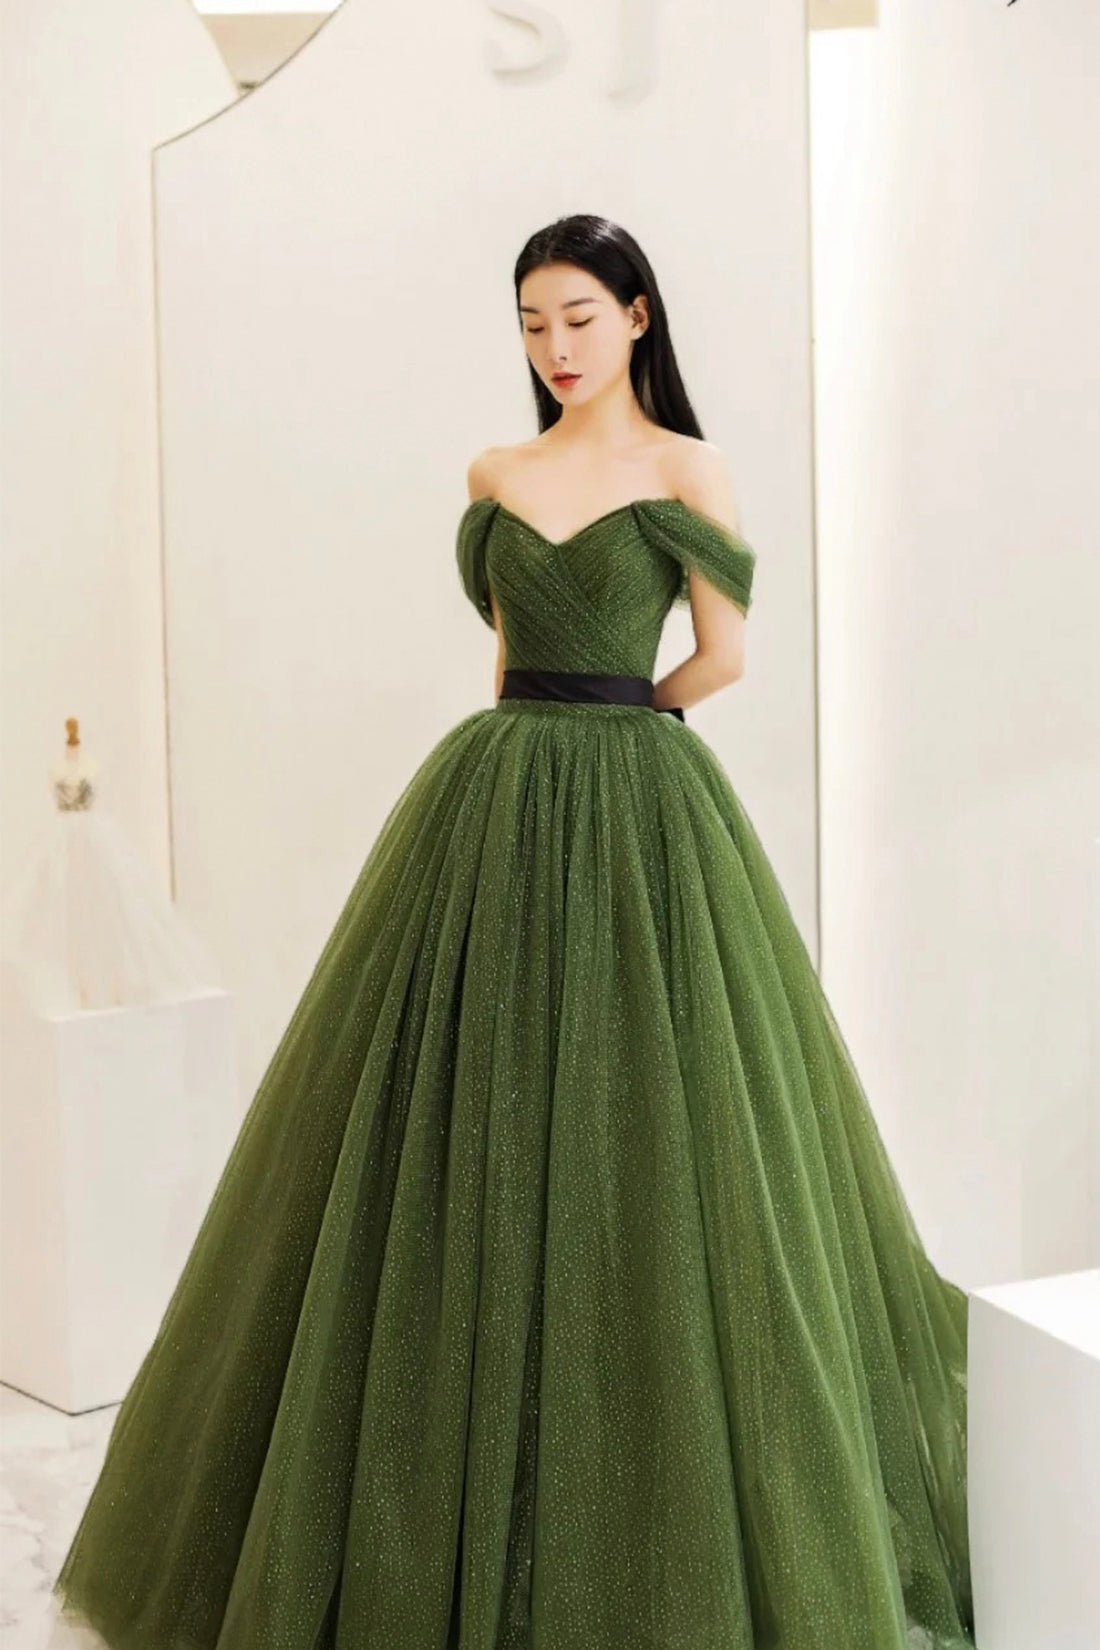 Green Tulle Long Prom Dress, Beautiful Off the Shoulder A-Line Evening Party Dress